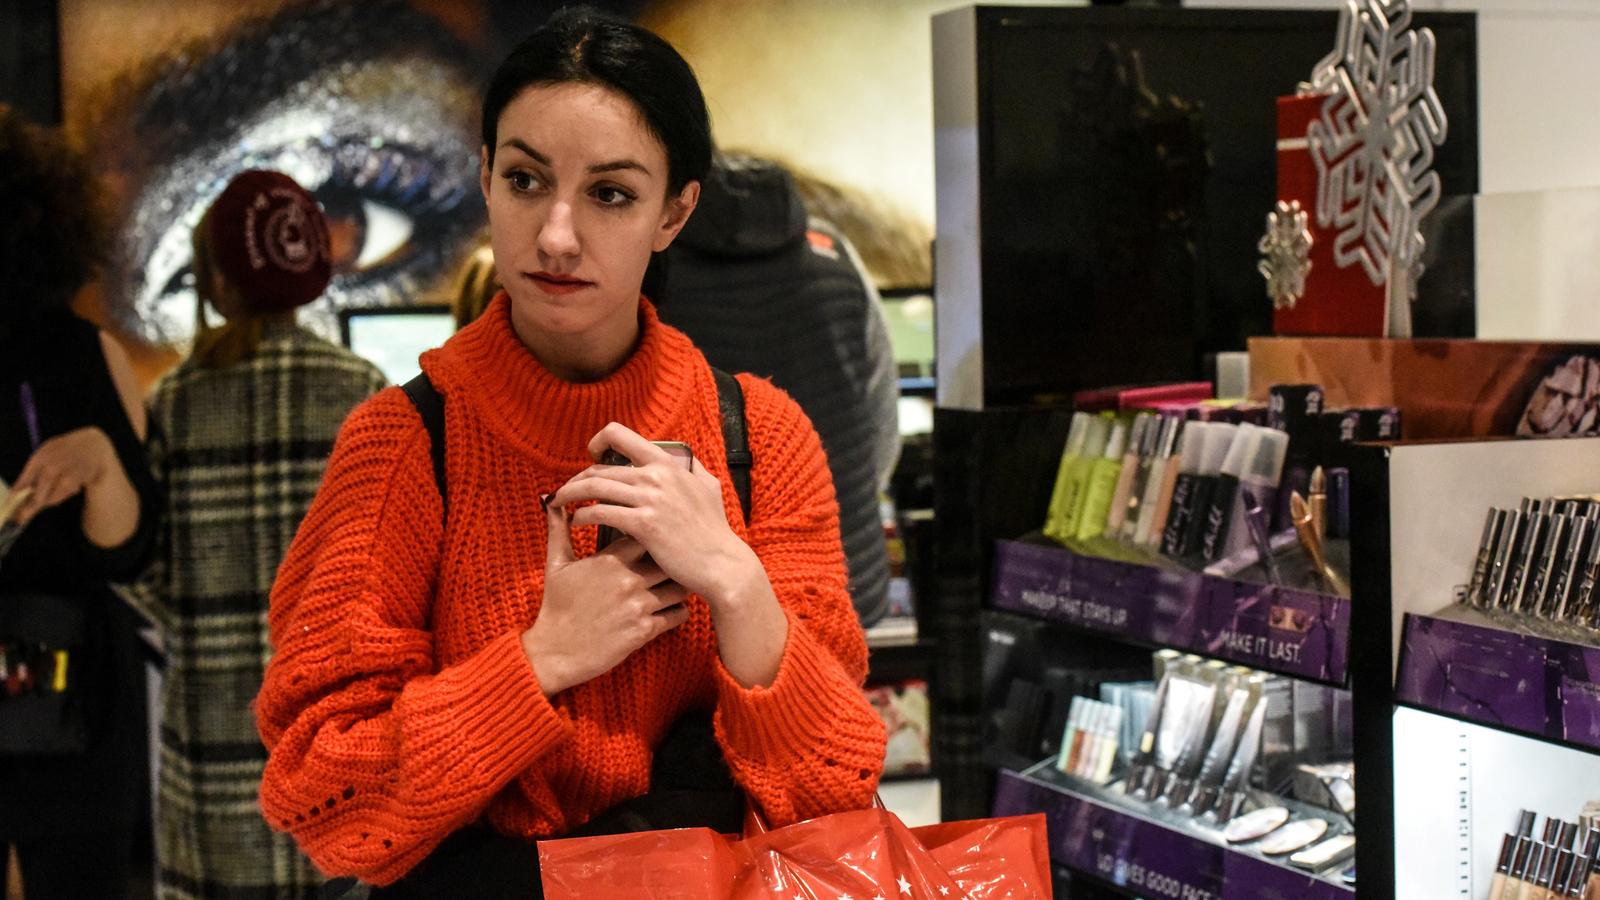 A woman wearing red sweater grips her phone at Macy's while shopping on Black Friday.